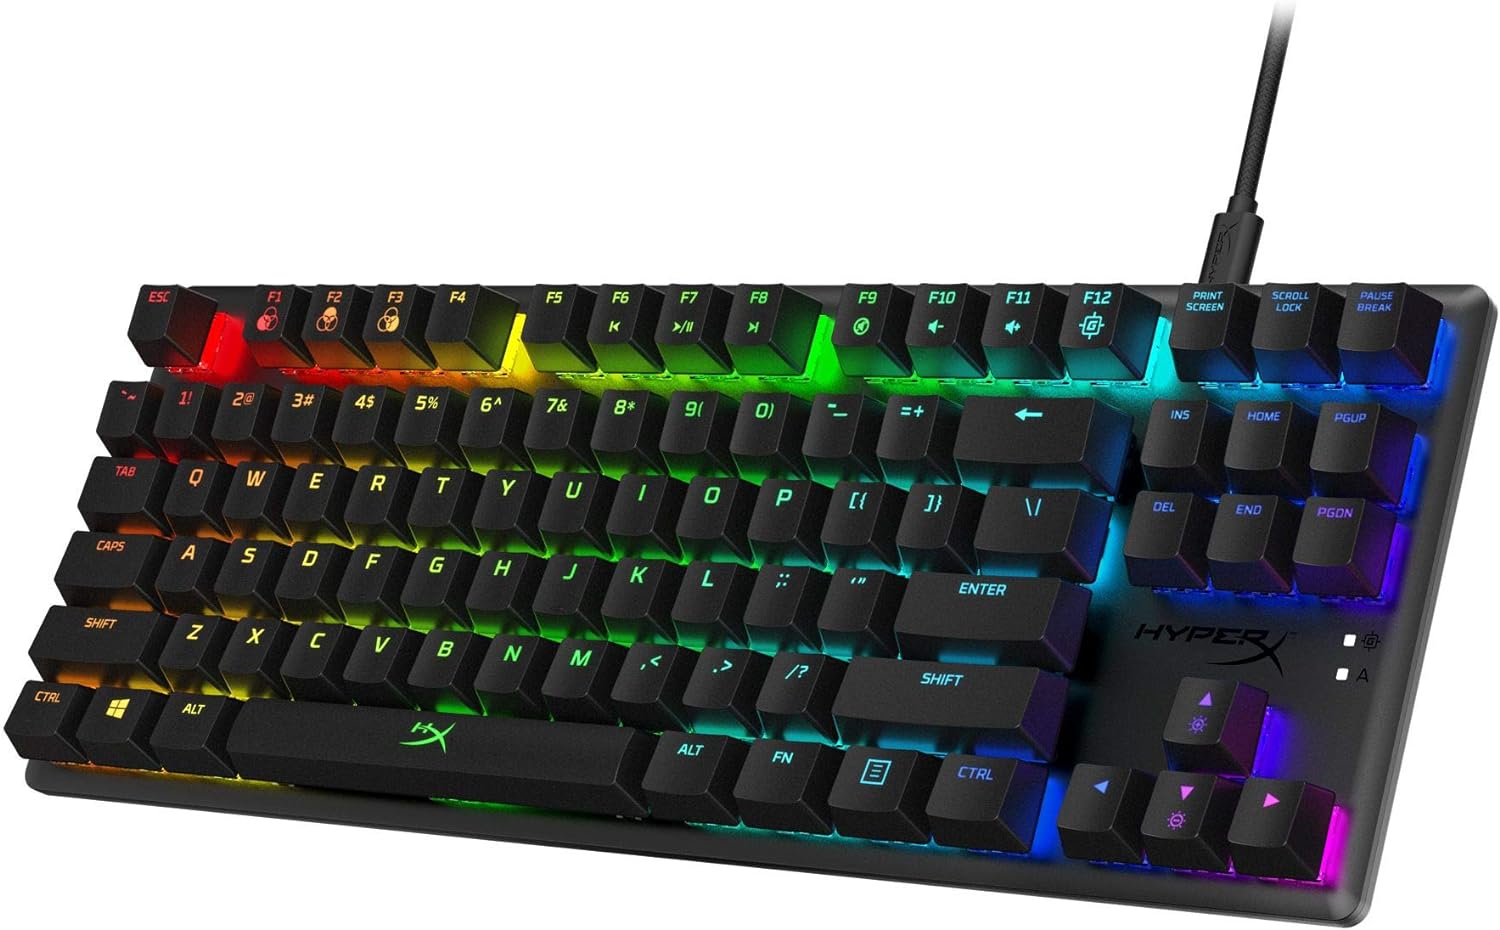 Tenkeyless Red Switches Mechanical Gaming Keyboard : HyperX Alloy Origins Core - Software Controlled Light & Macro Customization, Compact Factor, RGB LED